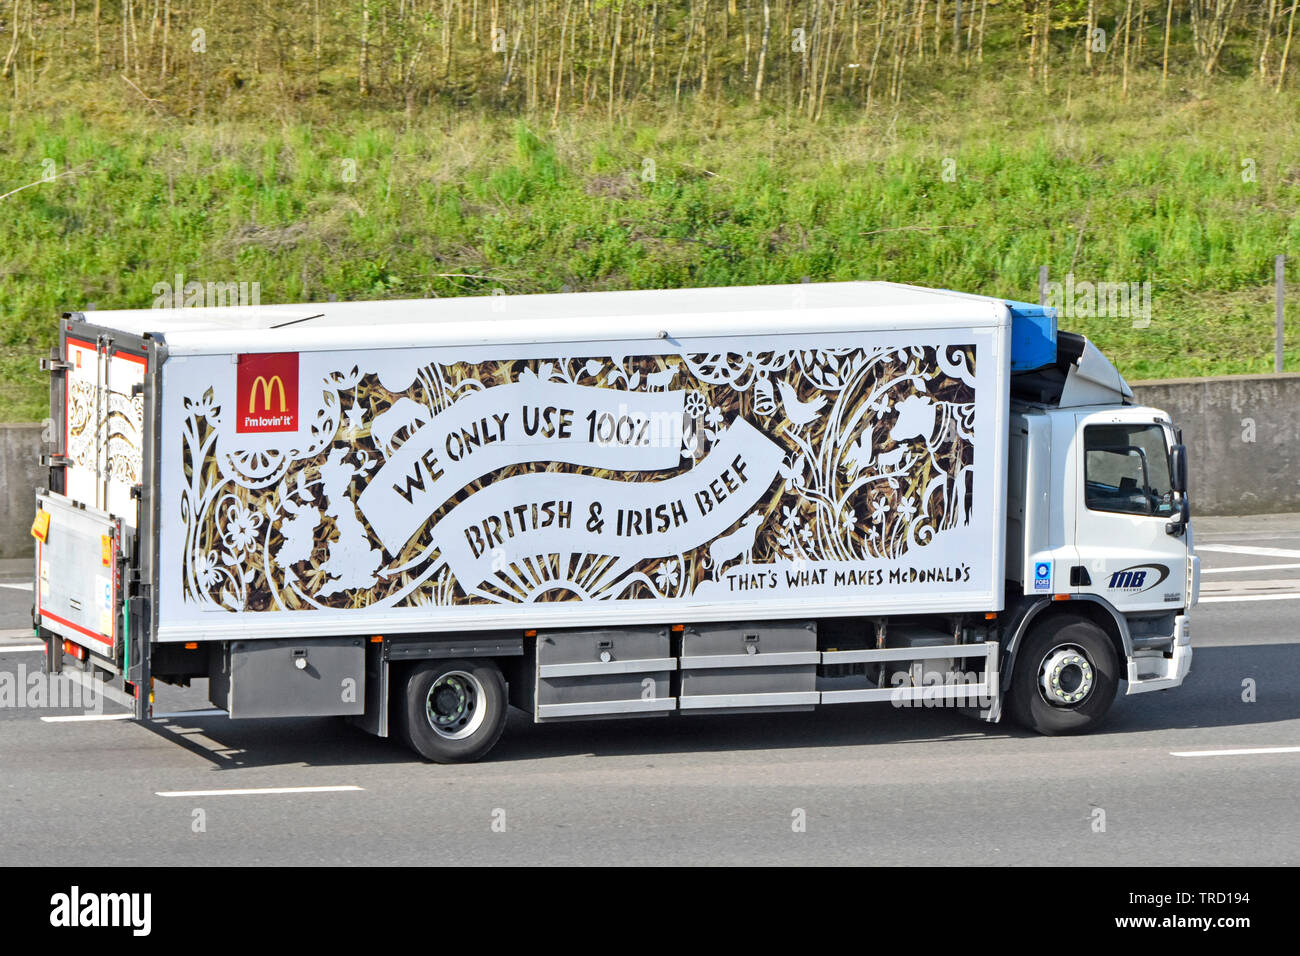 side-view-of-mcdonalds-brand-fast-food-restaurant-business-food-supply-chain-delivery-lorry-truck-advertising-use-british-irish-beef-on-uk-motorway-TRD194.jpg